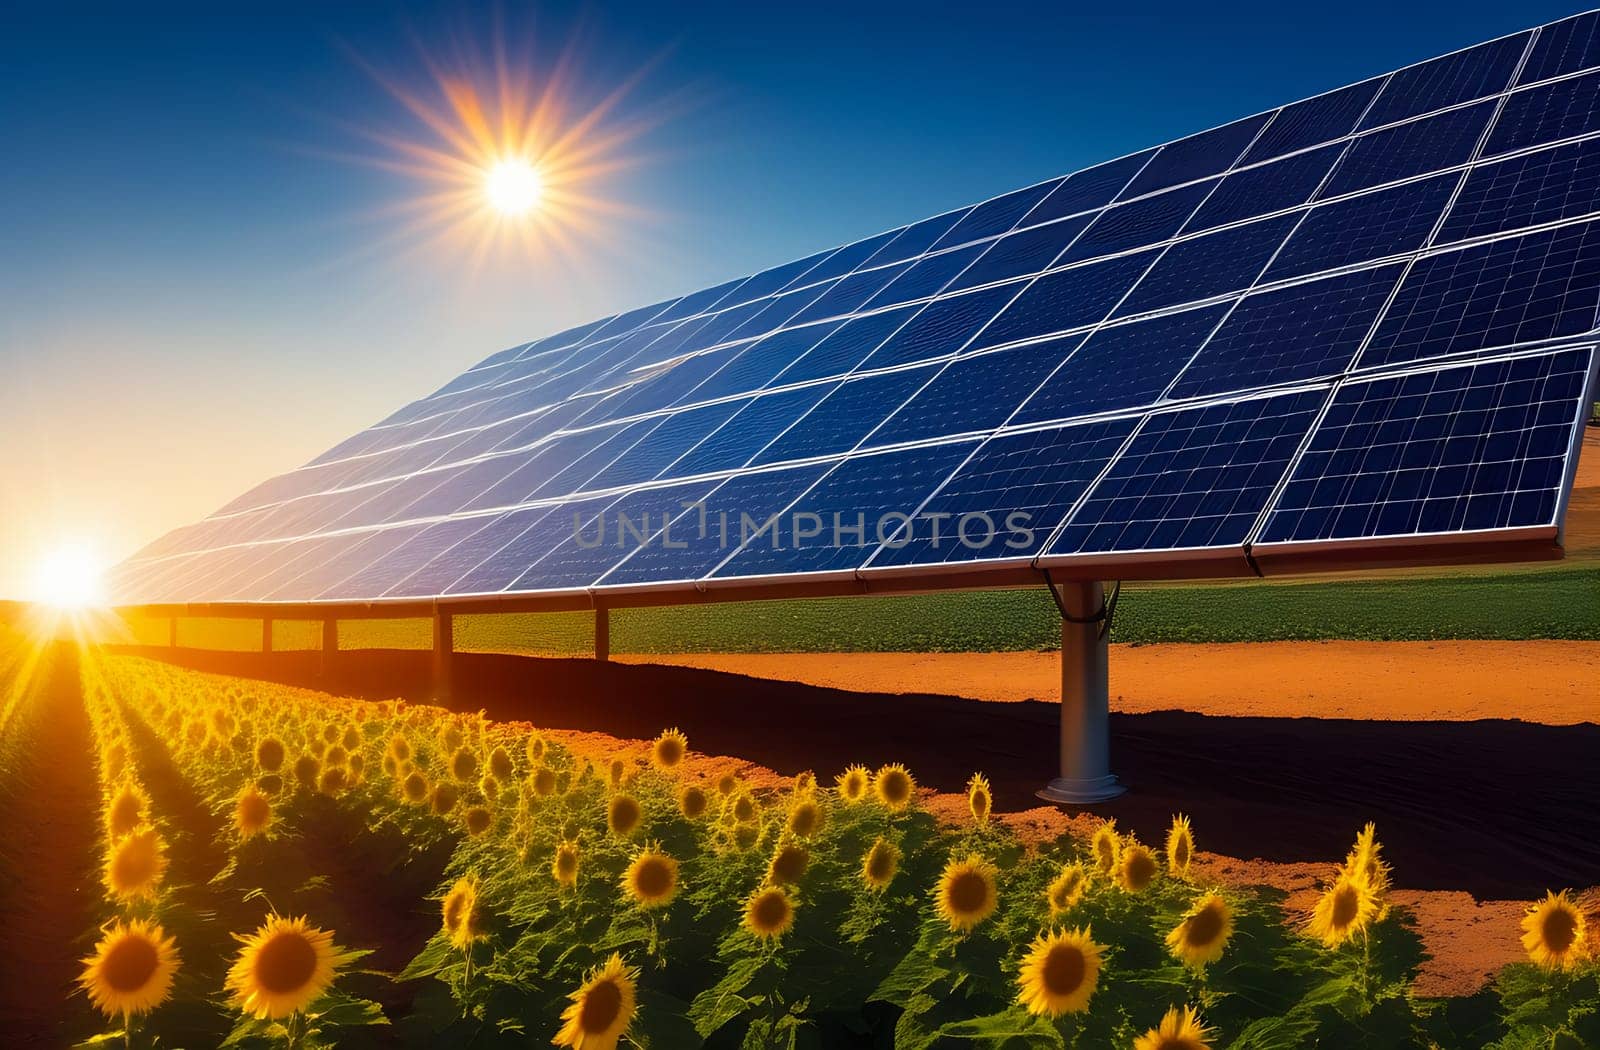 Solar panels as an alternative source of environmentally friendly energy, sunflower field on the background of solar panels.